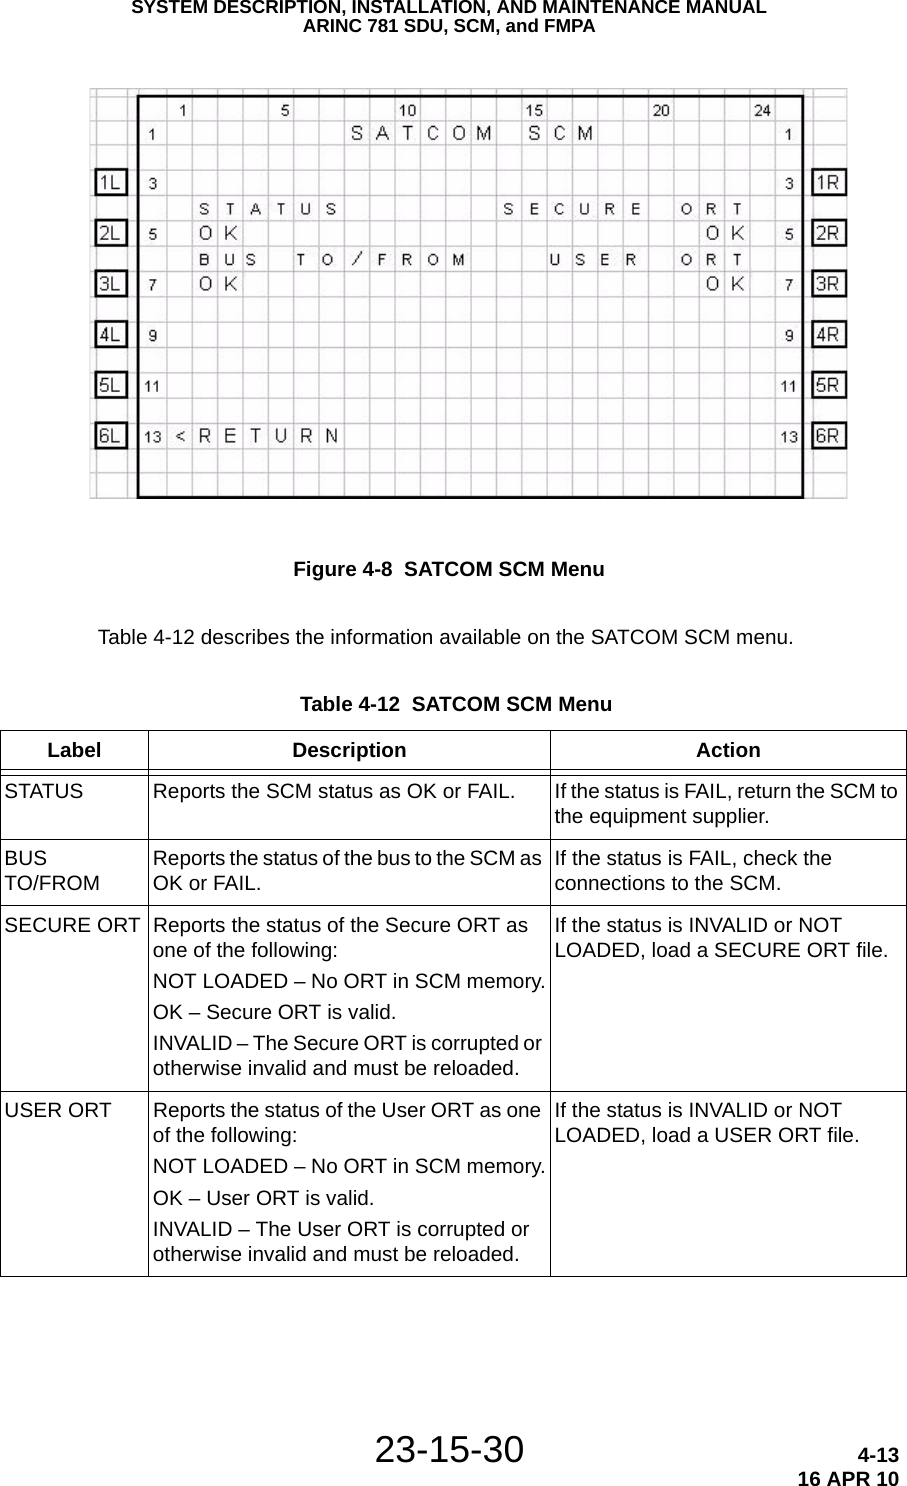 SYSTEM DESCRIPTION, INSTALLATION, AND MAINTENANCE MANUALARINC 781 SDU, SCM, and FMPA23-15-30 4-1316 APR 10 Figure 4-8  SATCOM SCM MenuTable 4-12 describes the information available on the SATCOM SCM menu. Table 4-12  SATCOM SCM Menu Label Description ActionSTATUS Reports the SCM status as OK or FAIL. If the status is FAIL, return the SCM to the equipment supplier.BUS TO/FROM Reports the status of the bus to the SCM as OK or FAIL. If the status is FAIL, check the connections to the SCM.SECURE ORT Reports the status of the Secure ORT as one of the following:NOT LOADED – No ORT in SCM memory.OK – Secure ORT is valid.INVALID – The Secure ORT is corrupted or otherwise invalid and must be reloaded.If the status is INVALID or NOT LOADED, load a SECURE ORT file.USER ORT Reports the status of the User ORT as one of the following:NOT LOADED – No ORT in SCM memory.OK – User ORT is valid.INVALID – The User ORT is corrupted or otherwise invalid and must be reloaded.If the status is INVALID or NOT LOADED, load a USER ORT file.